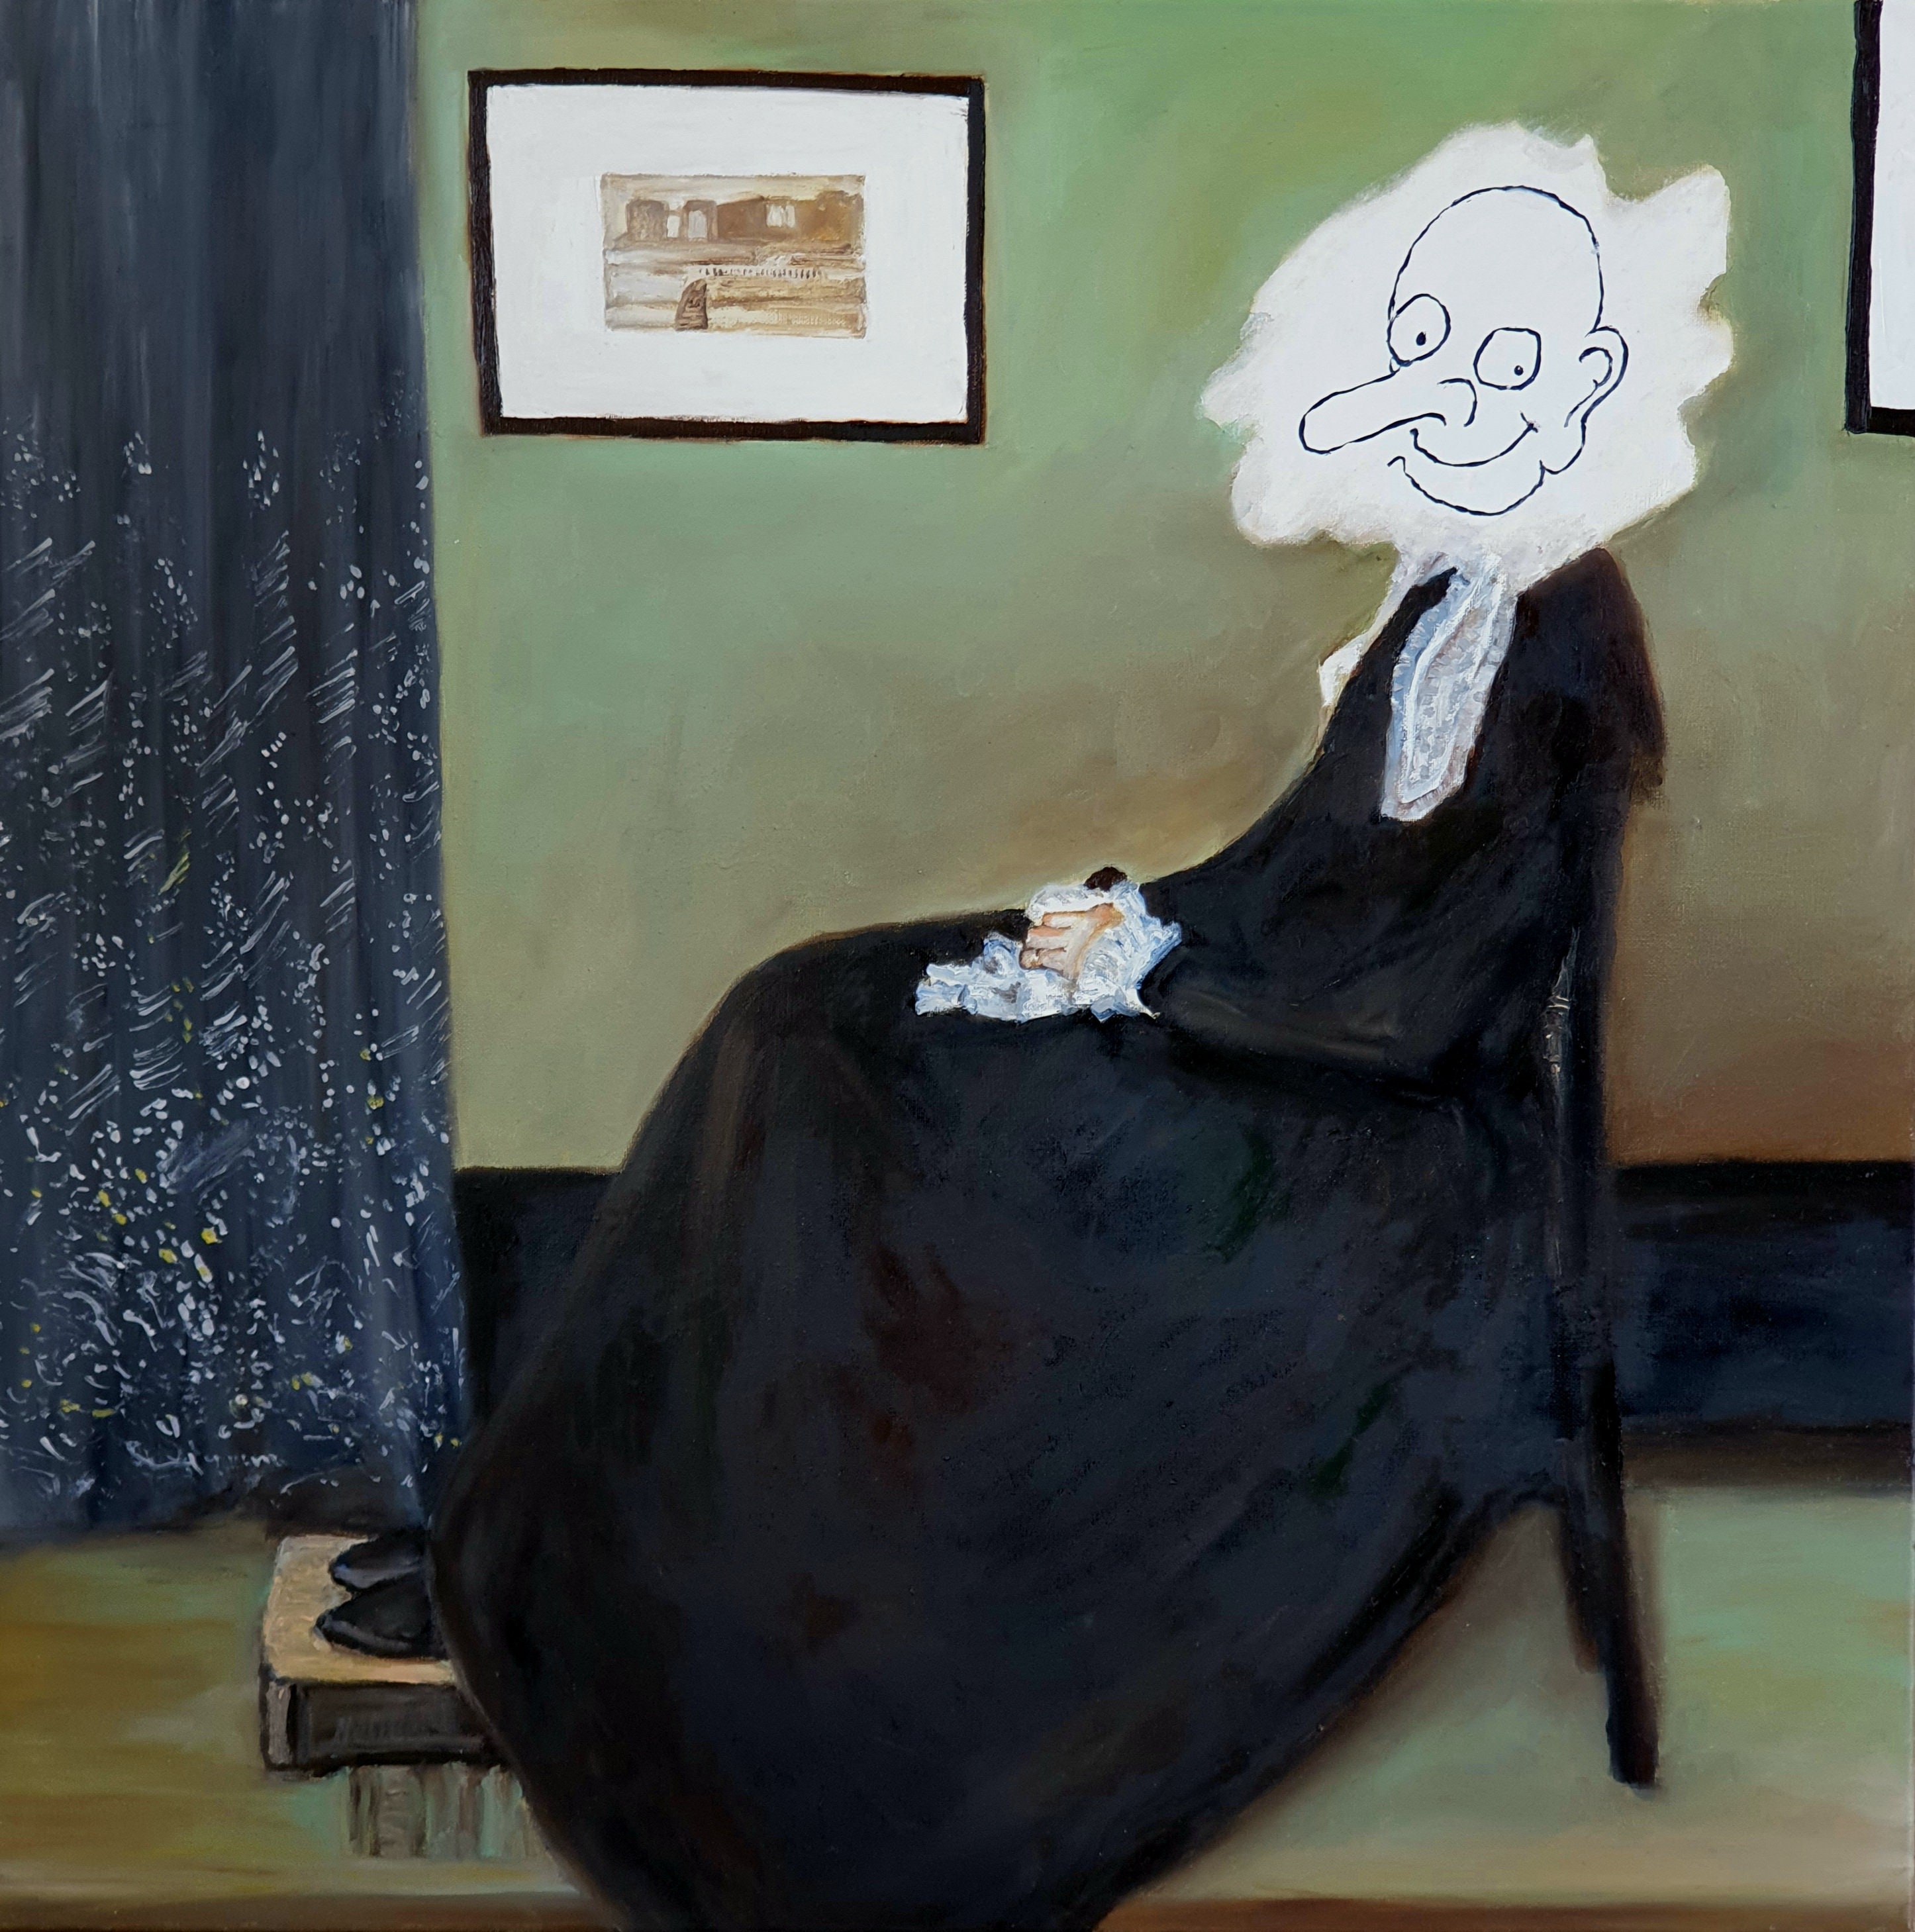 Oil on Canvas Mr. Bean Funny Art. Whistlers Mother Mr. Bean. - Etsy Canada